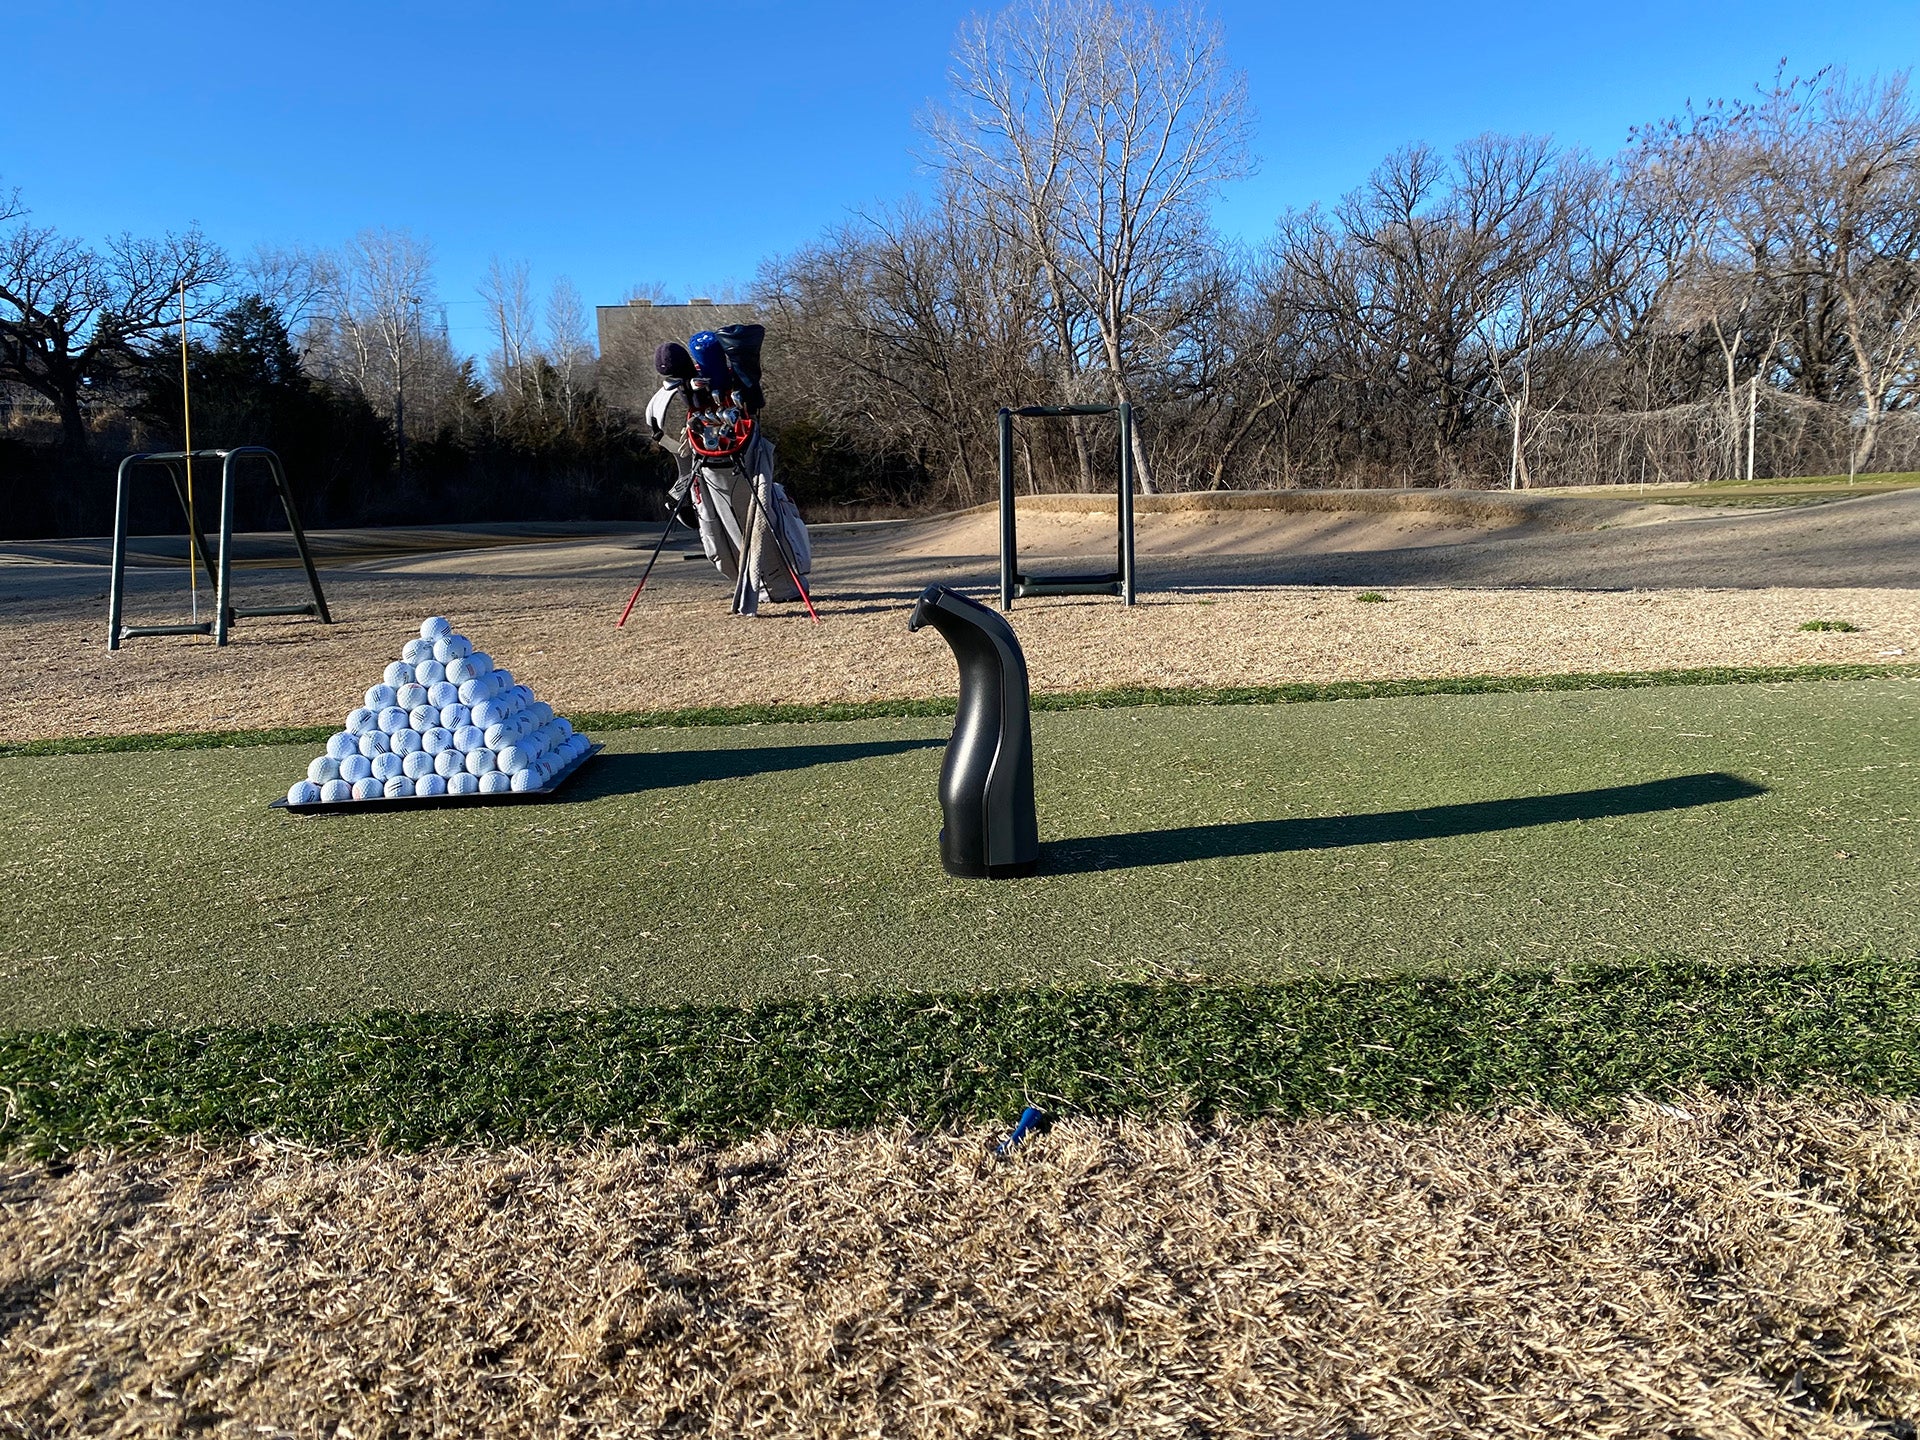 The Bushnell Launch Pro set up on the range next to a pyramid of golf balls and a golf bag in the background